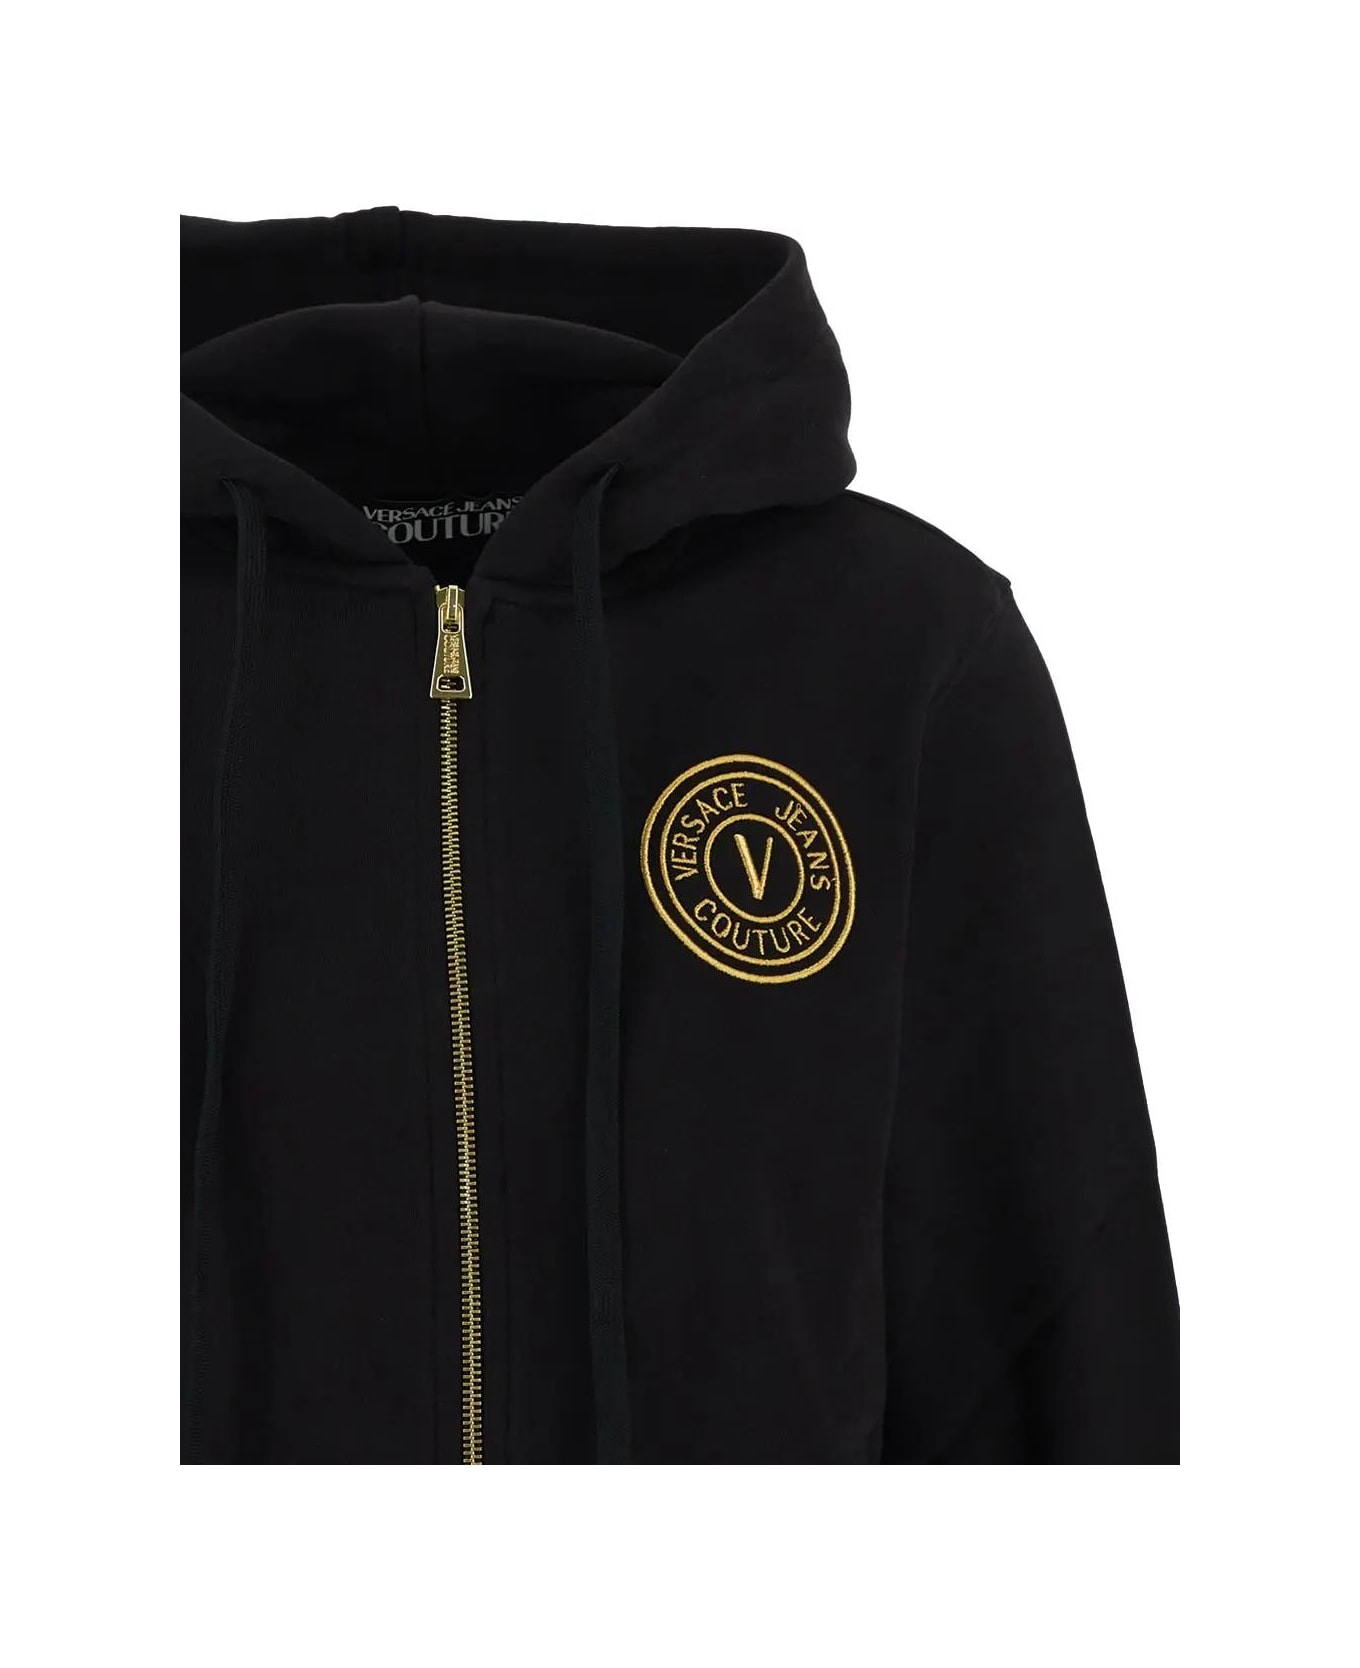 Versace Jeans Couture Logo Hoodie - Black/gold